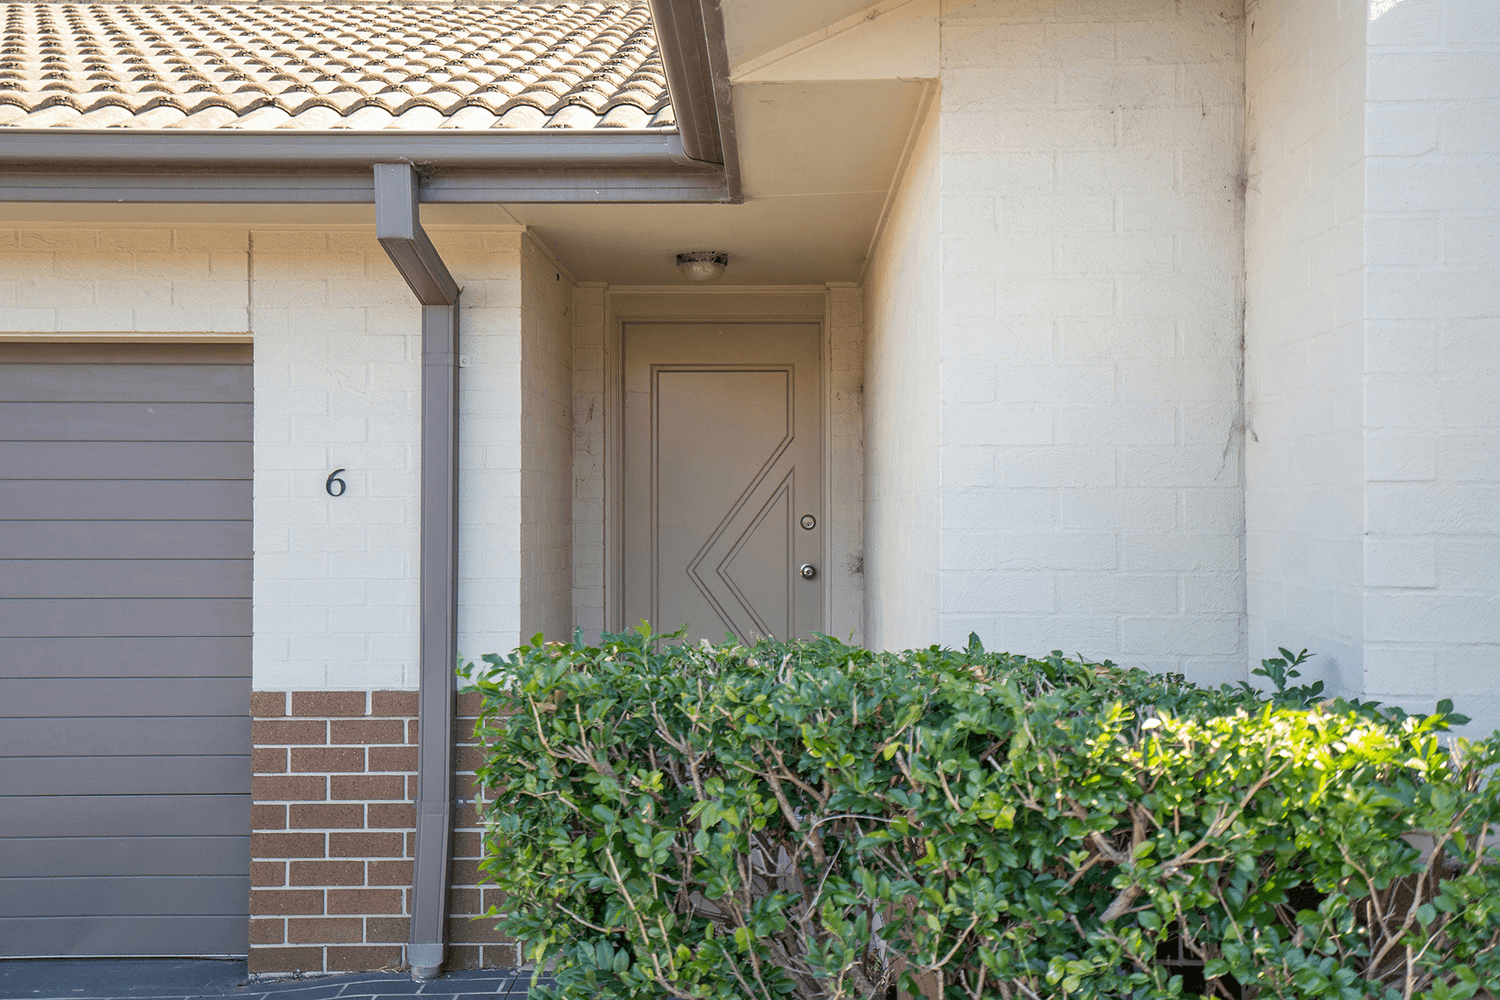 6/12 Denton Park Drive, Rutherford, NSW 2320